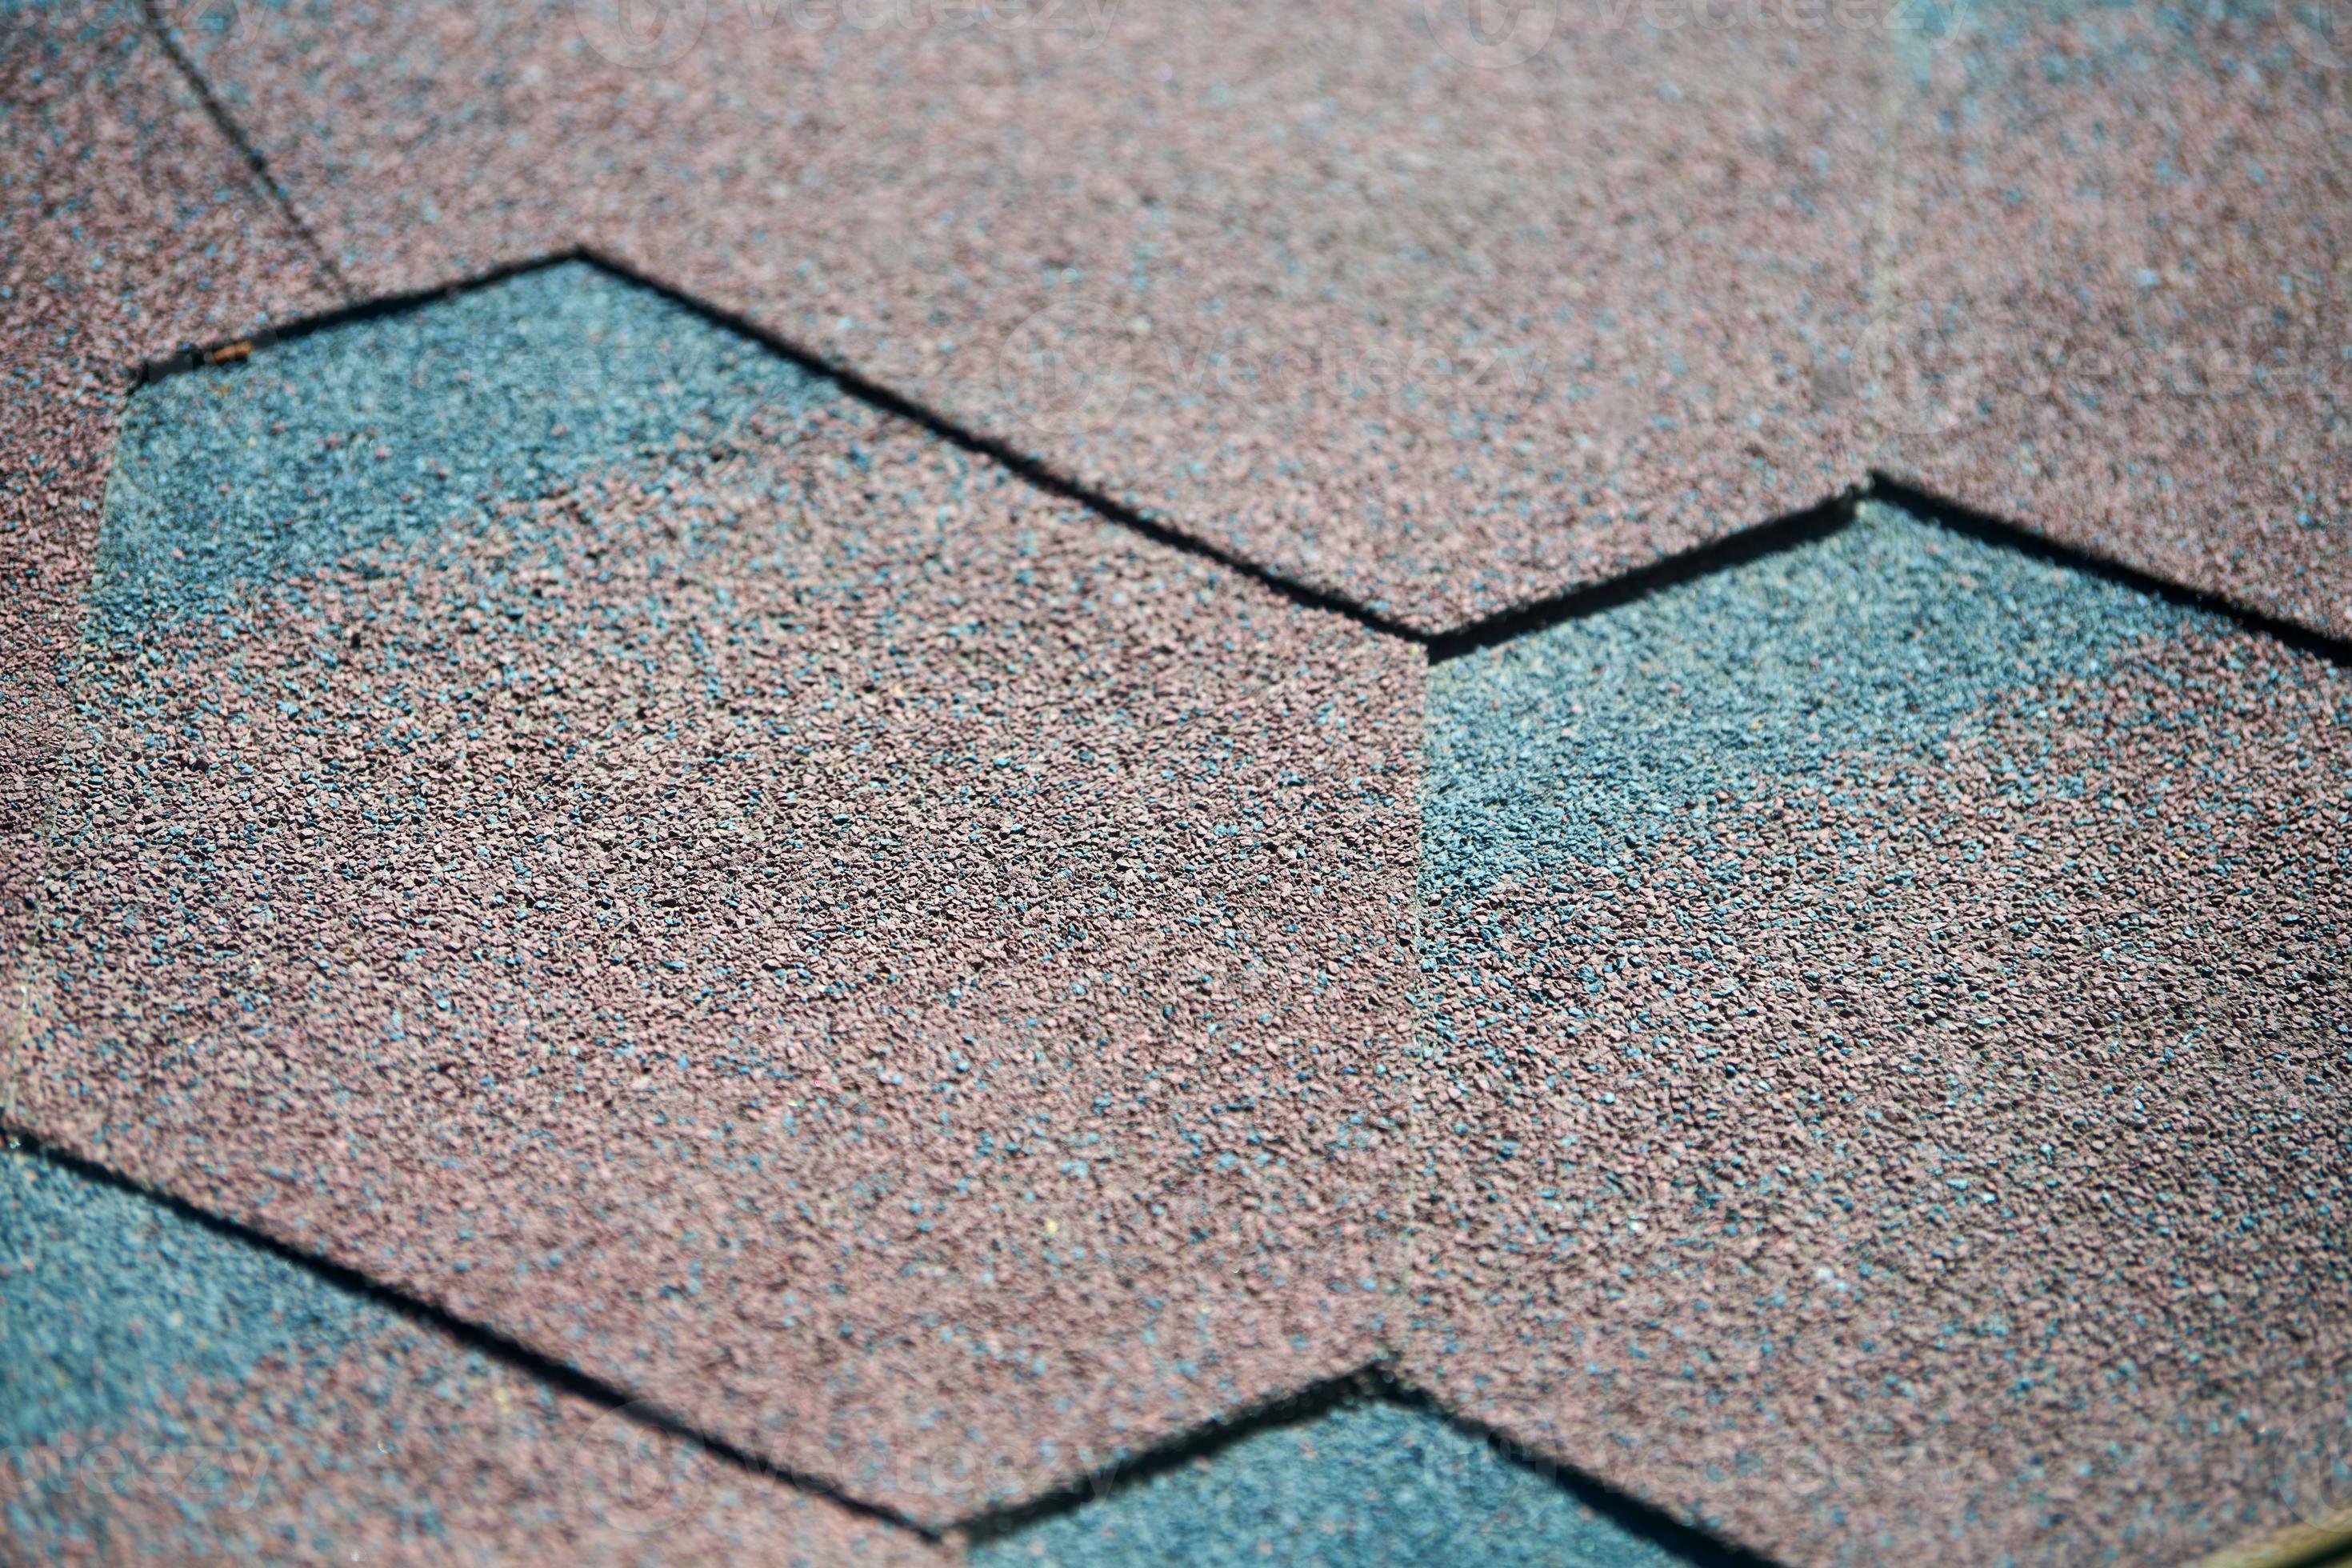 https://static.vecteezy.com/system/resources/previews/009/755/451/large_2x/modern-roof-shingles-tiles-close-up-soft-asphalt-roof-cover-new-roofing-construction-easy-roofing-repair-photo.jpg